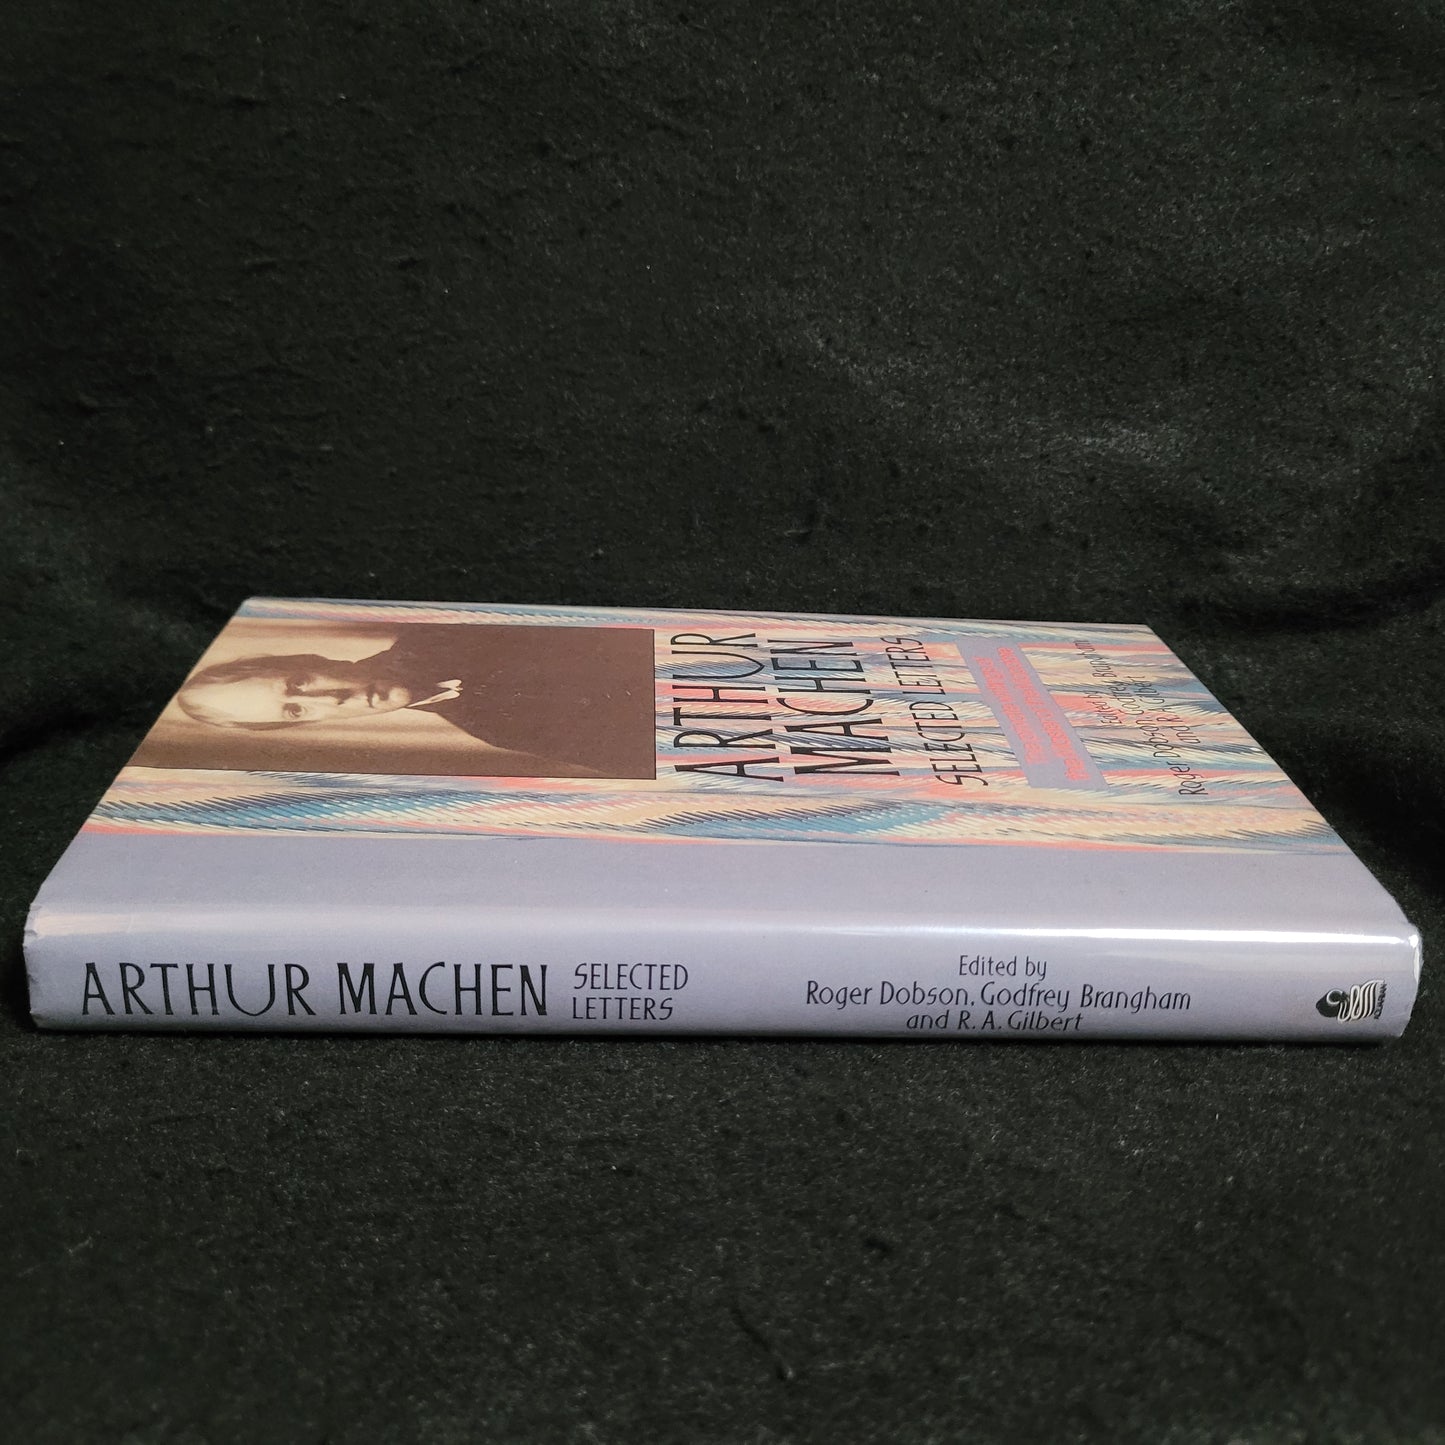 Arthur Machen Selected Letters: The private writings of the Master of the Macabre edited by Roger Dobson, Godfrey Brangham and R.A. Gilbert (The Aquarian Press, 1988) Hardcover